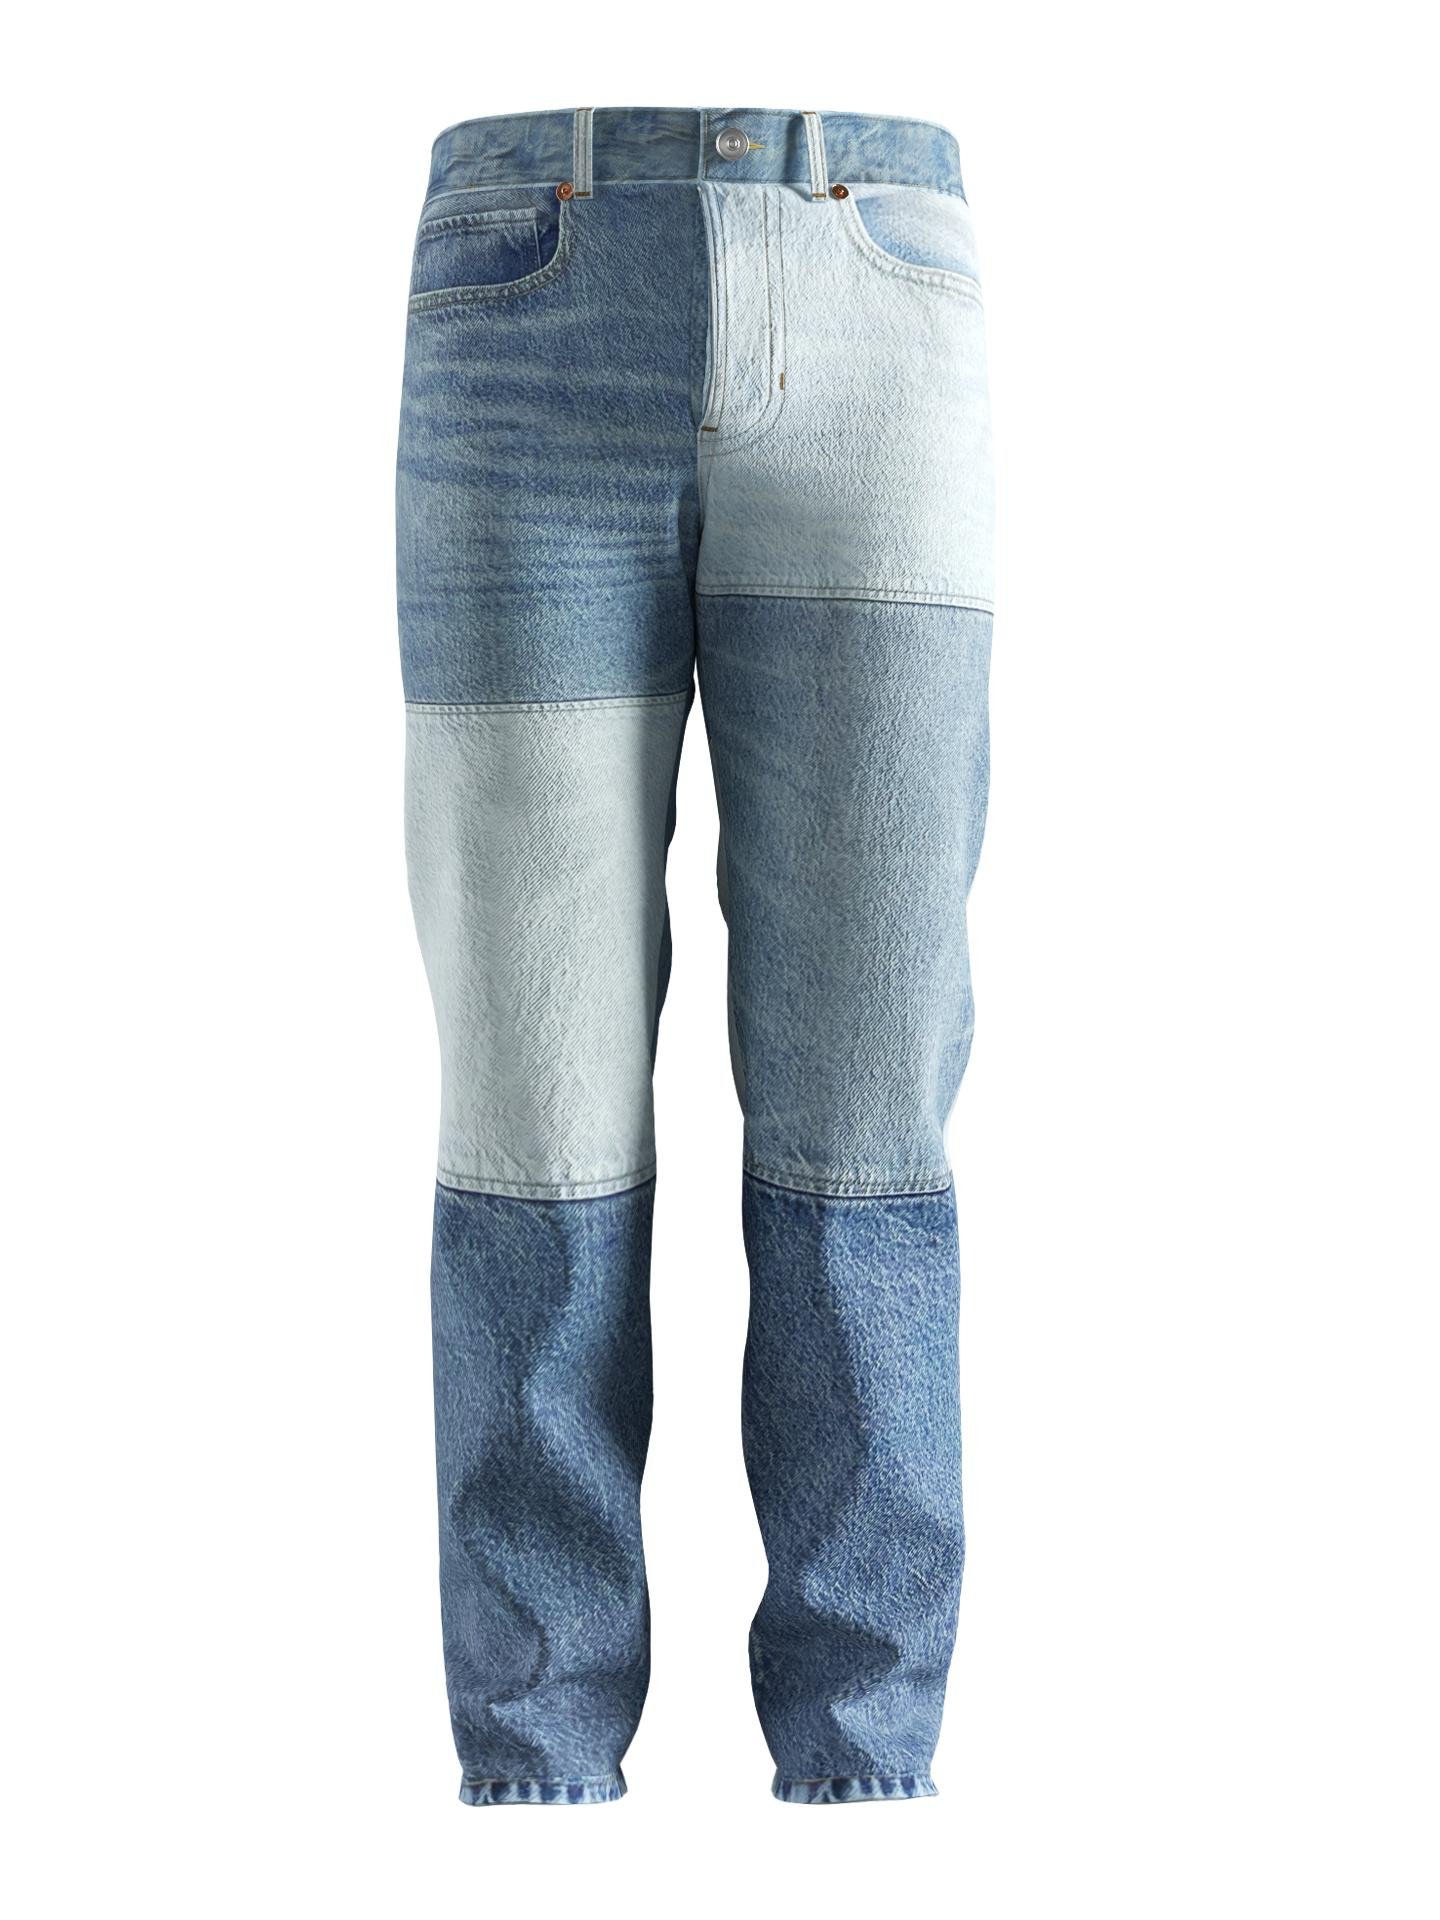 Pacsun Patched Jeans by PACSUN